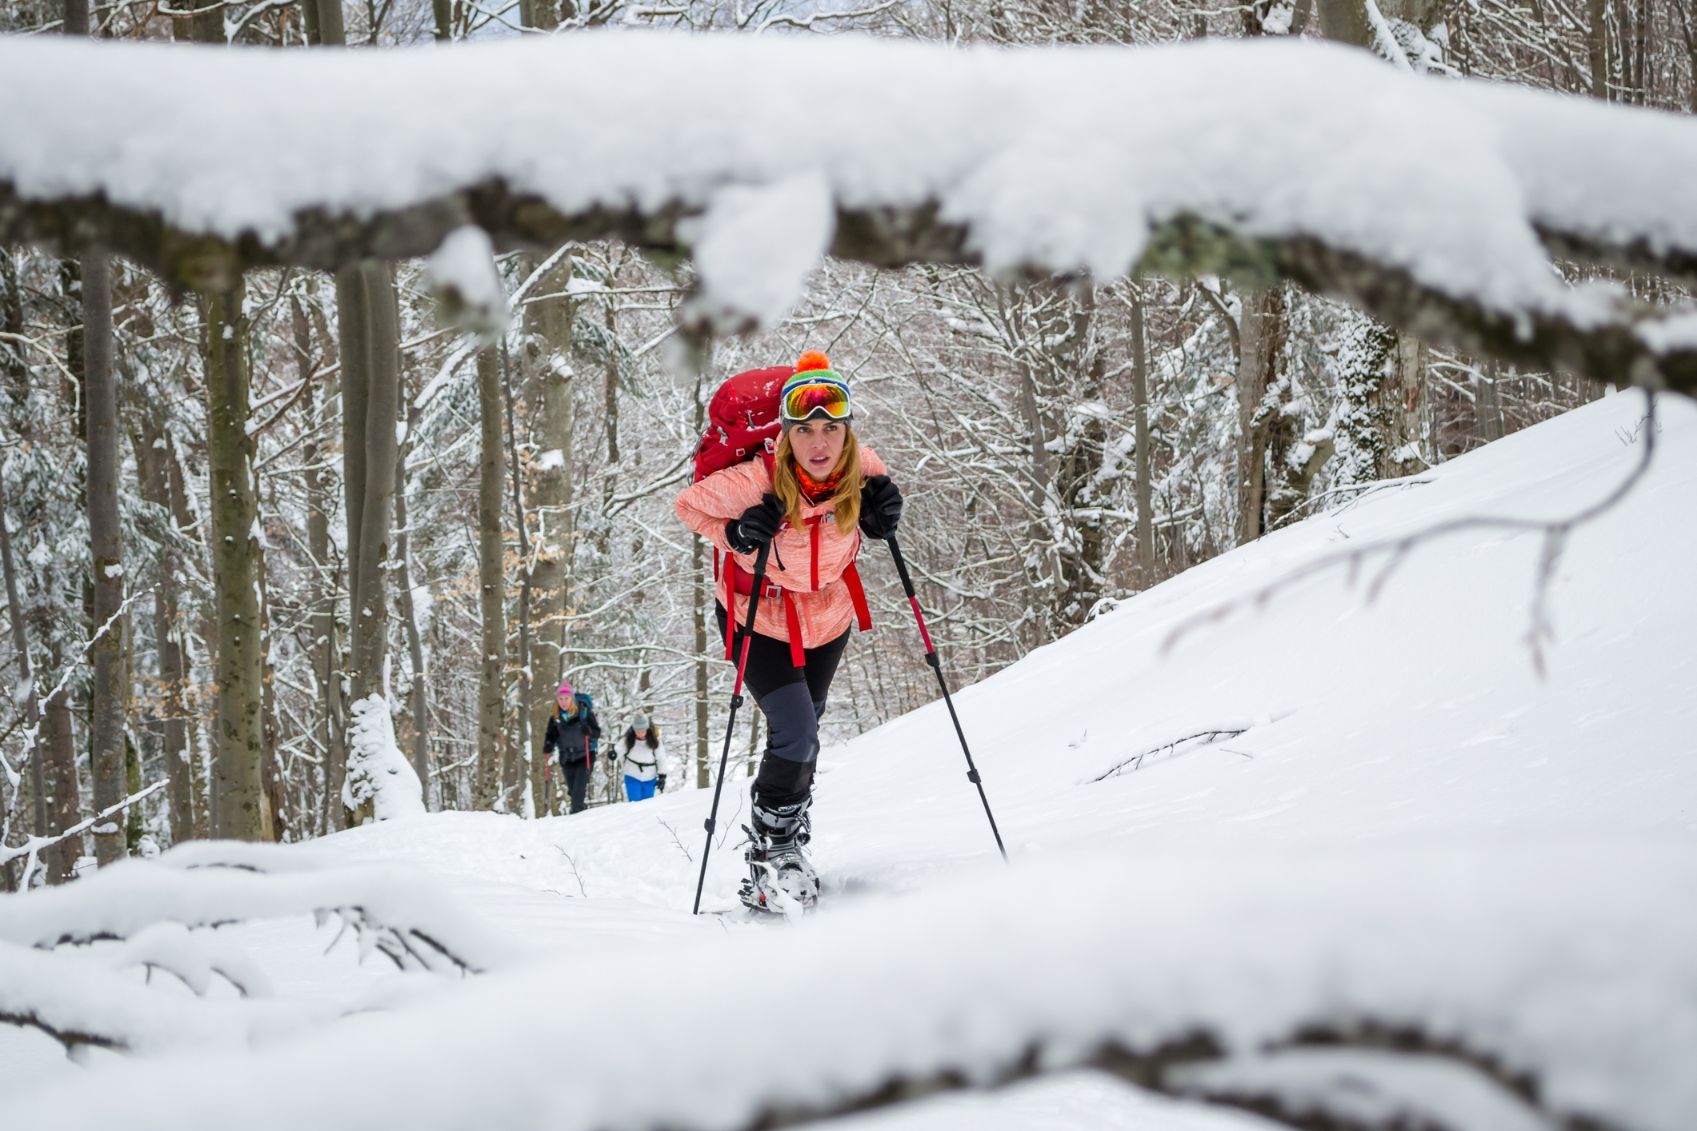 A woman ski touring in the forest.